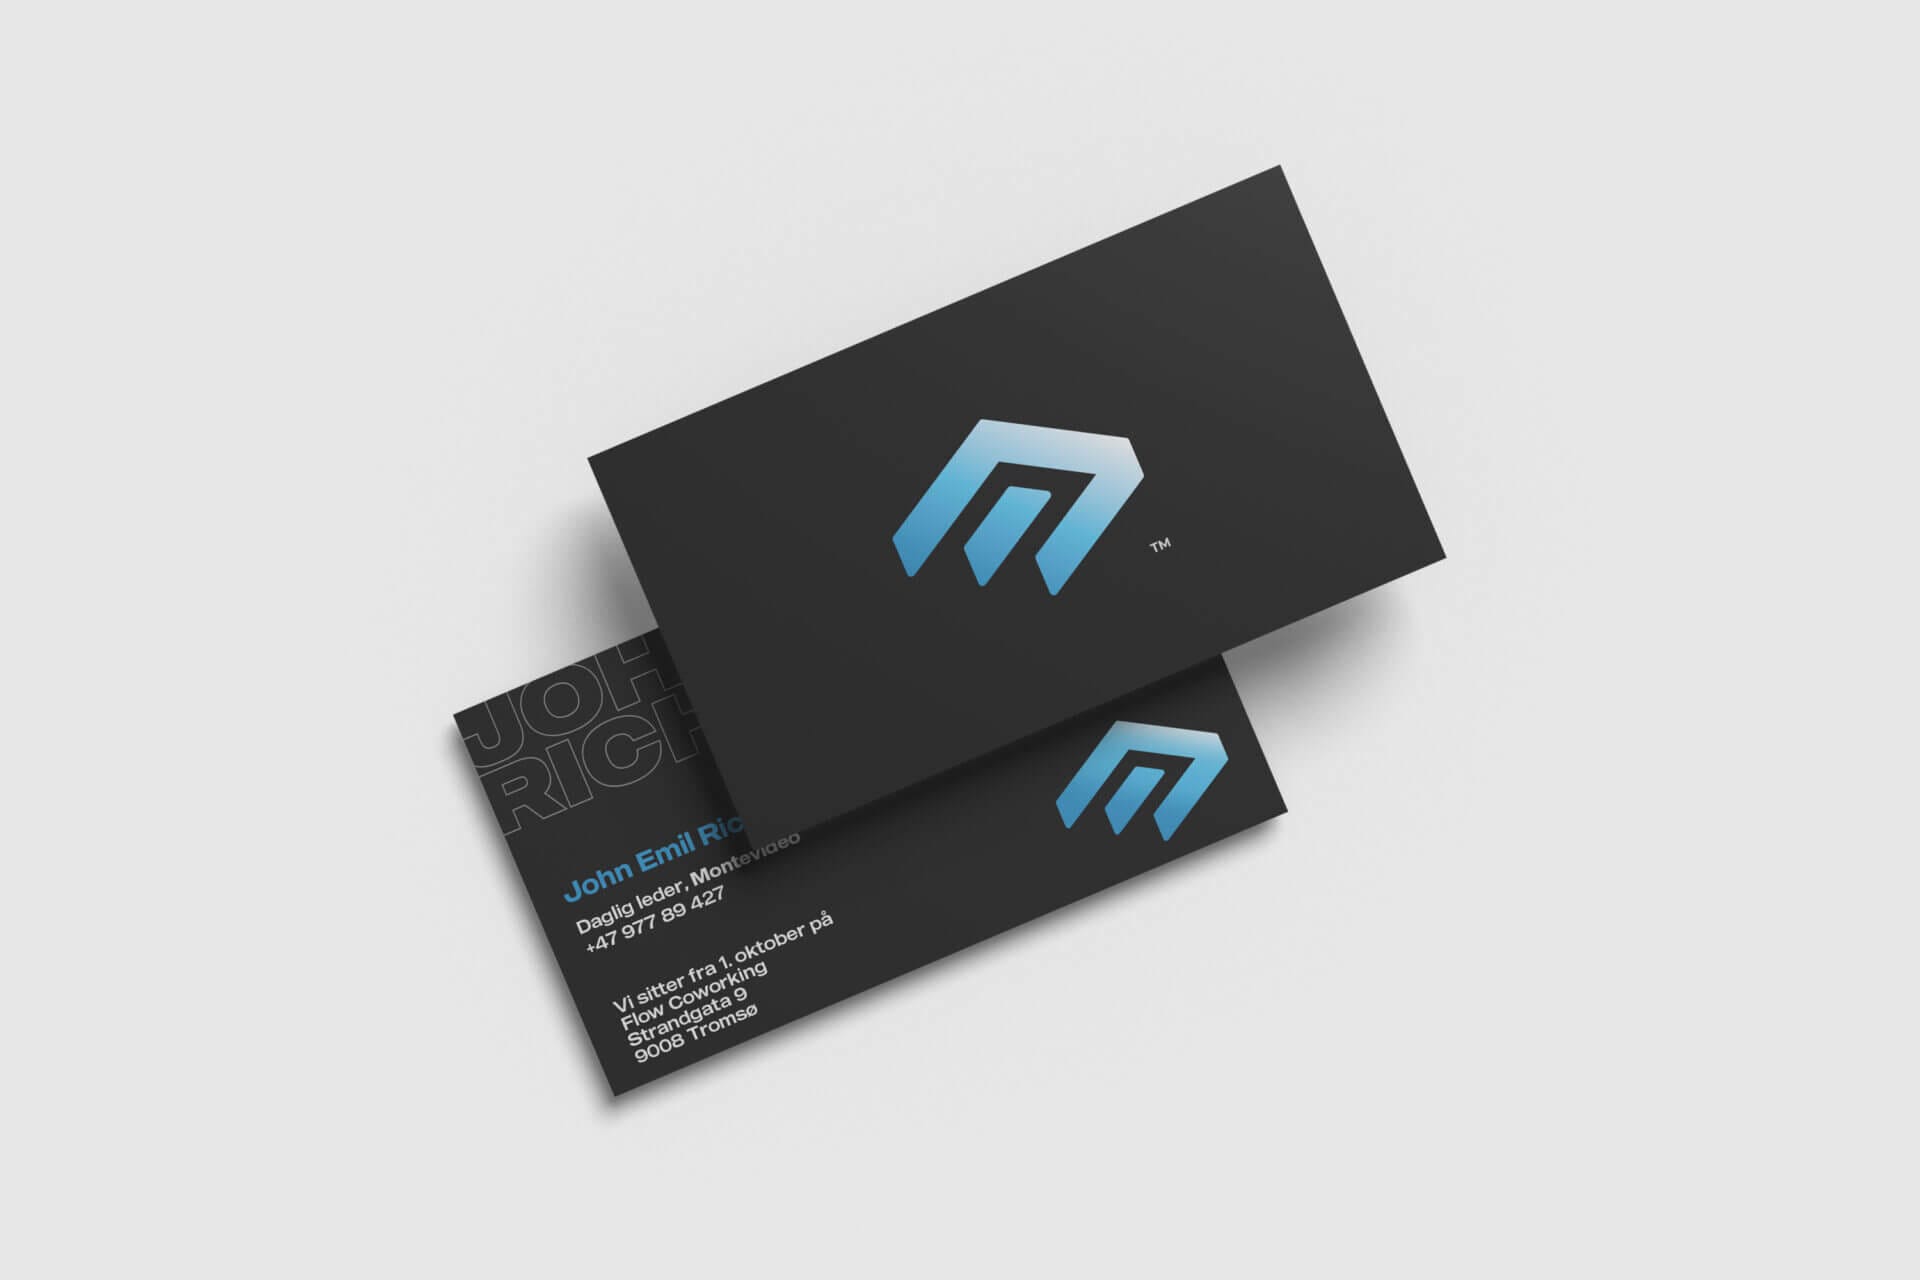 A black business card with a blue logo on it.